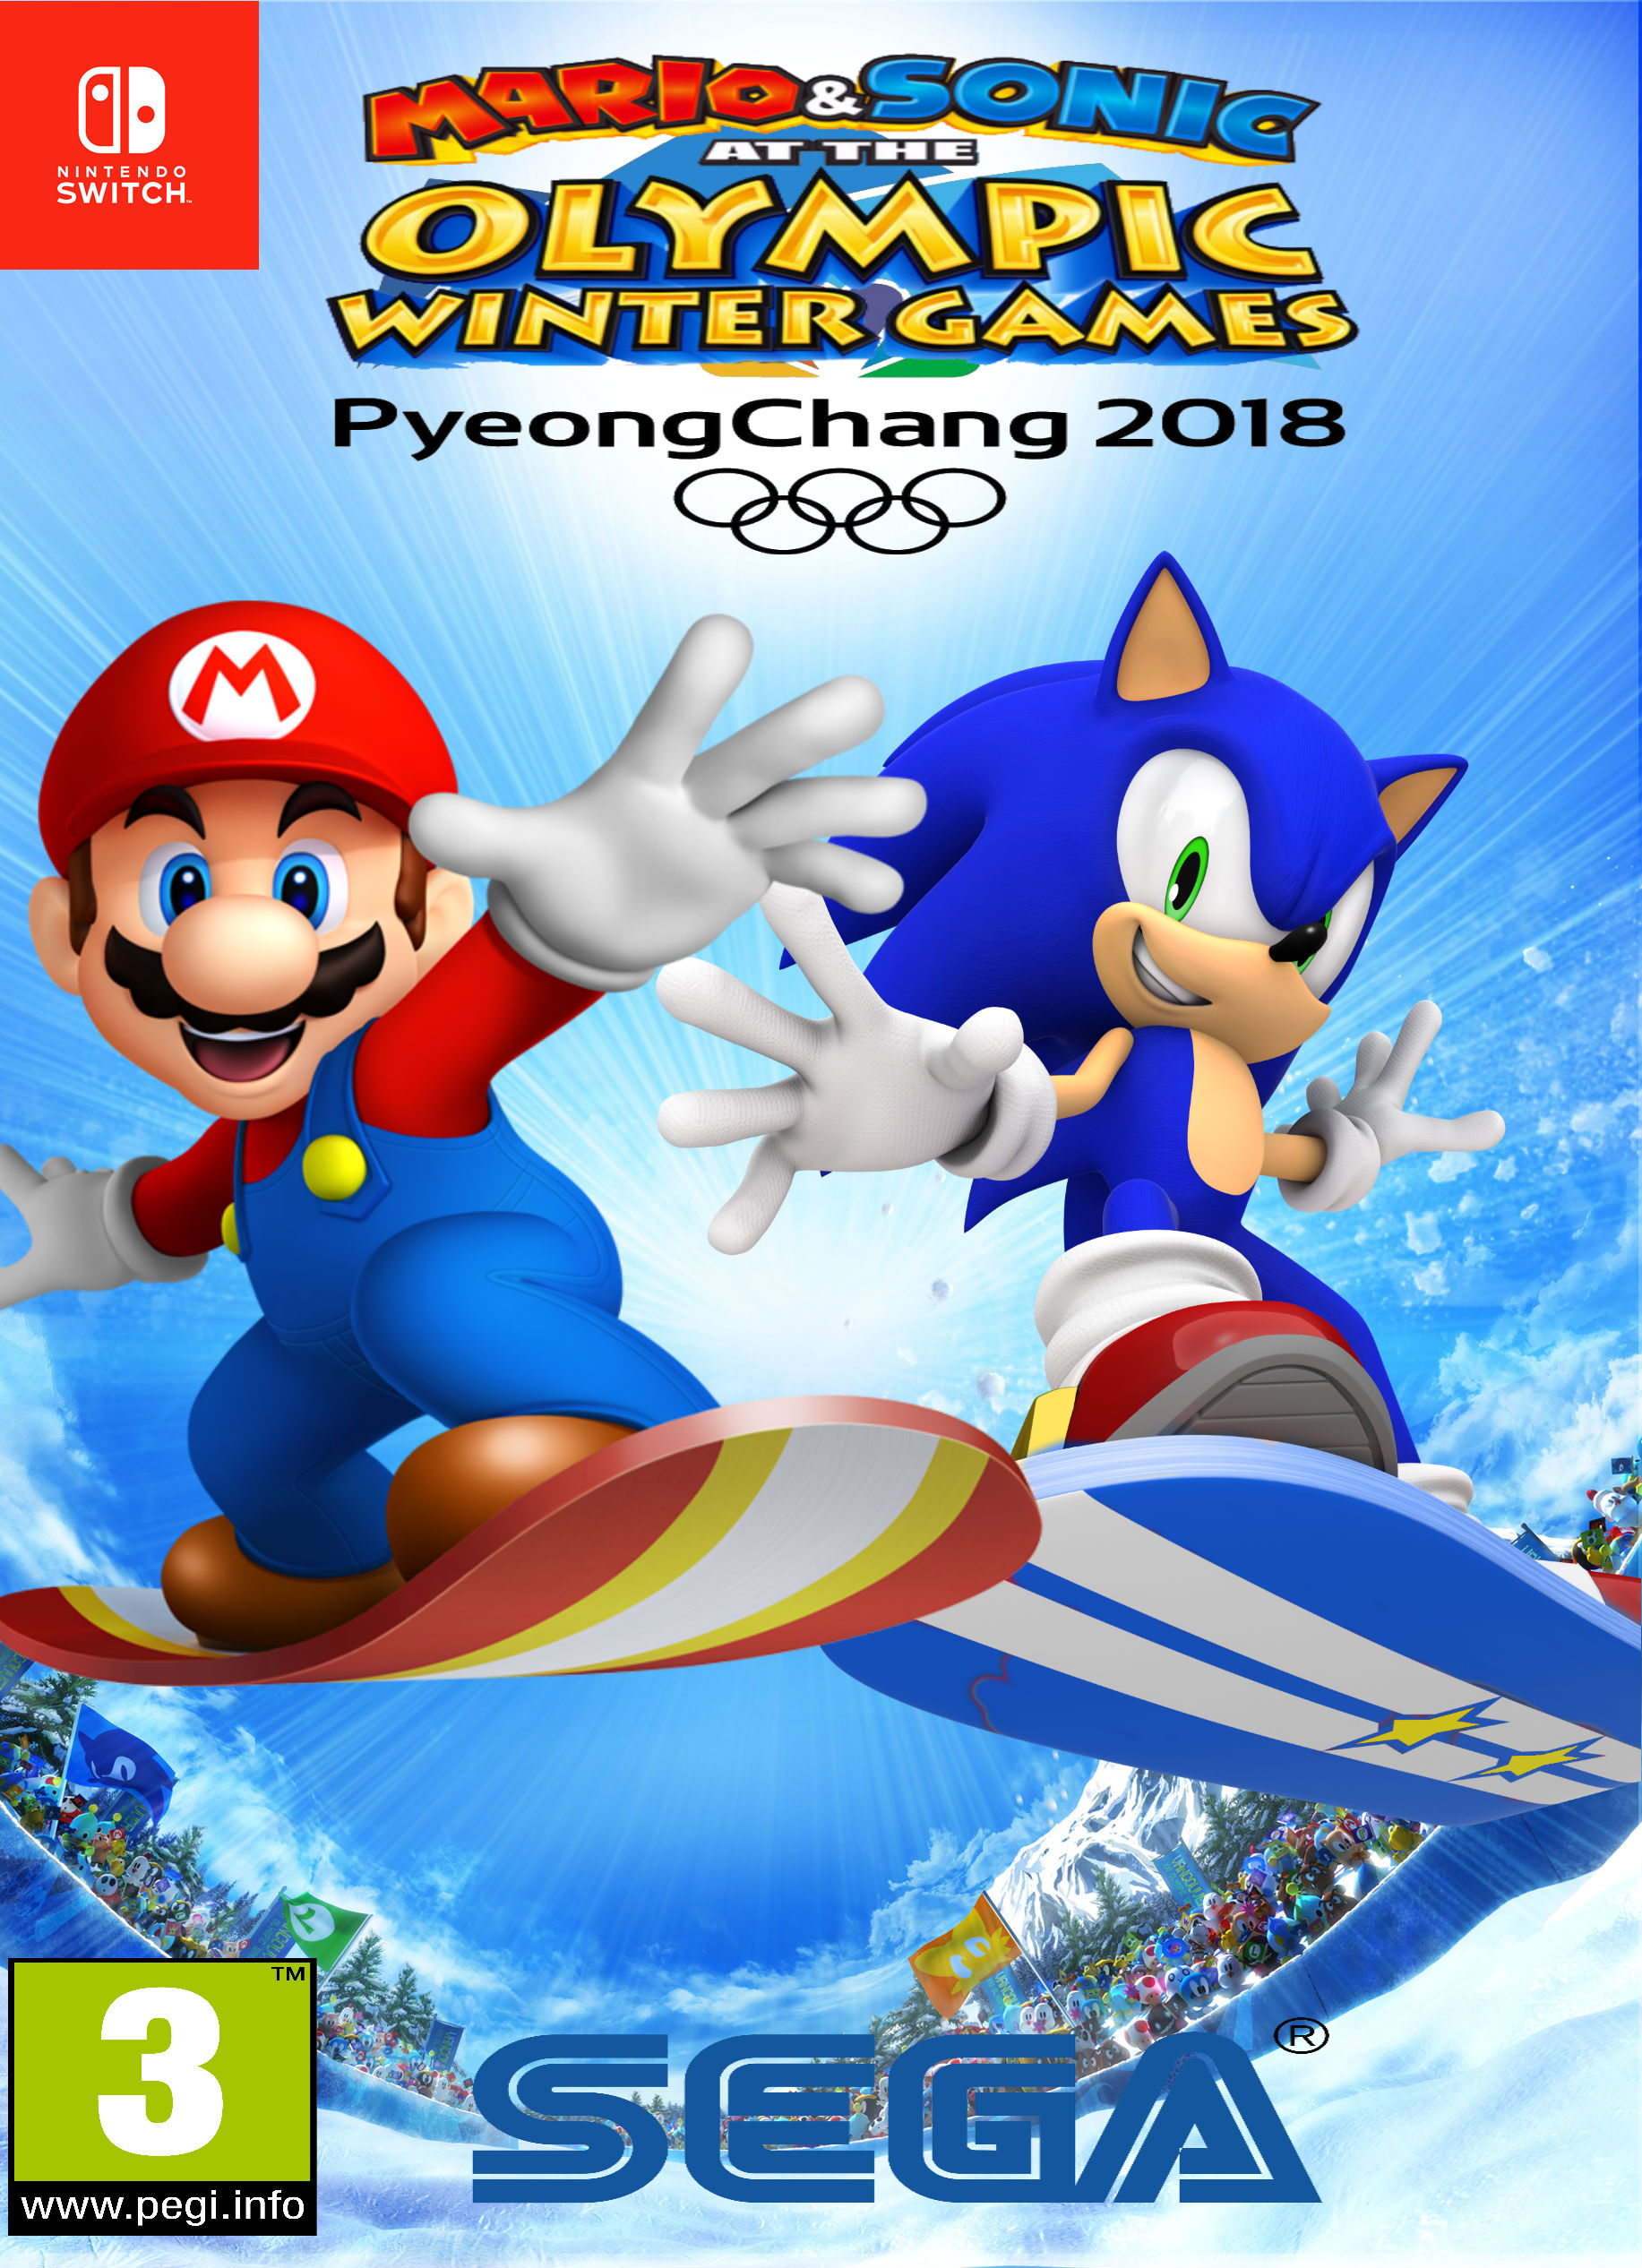 mario & sonic at the olympic games switch